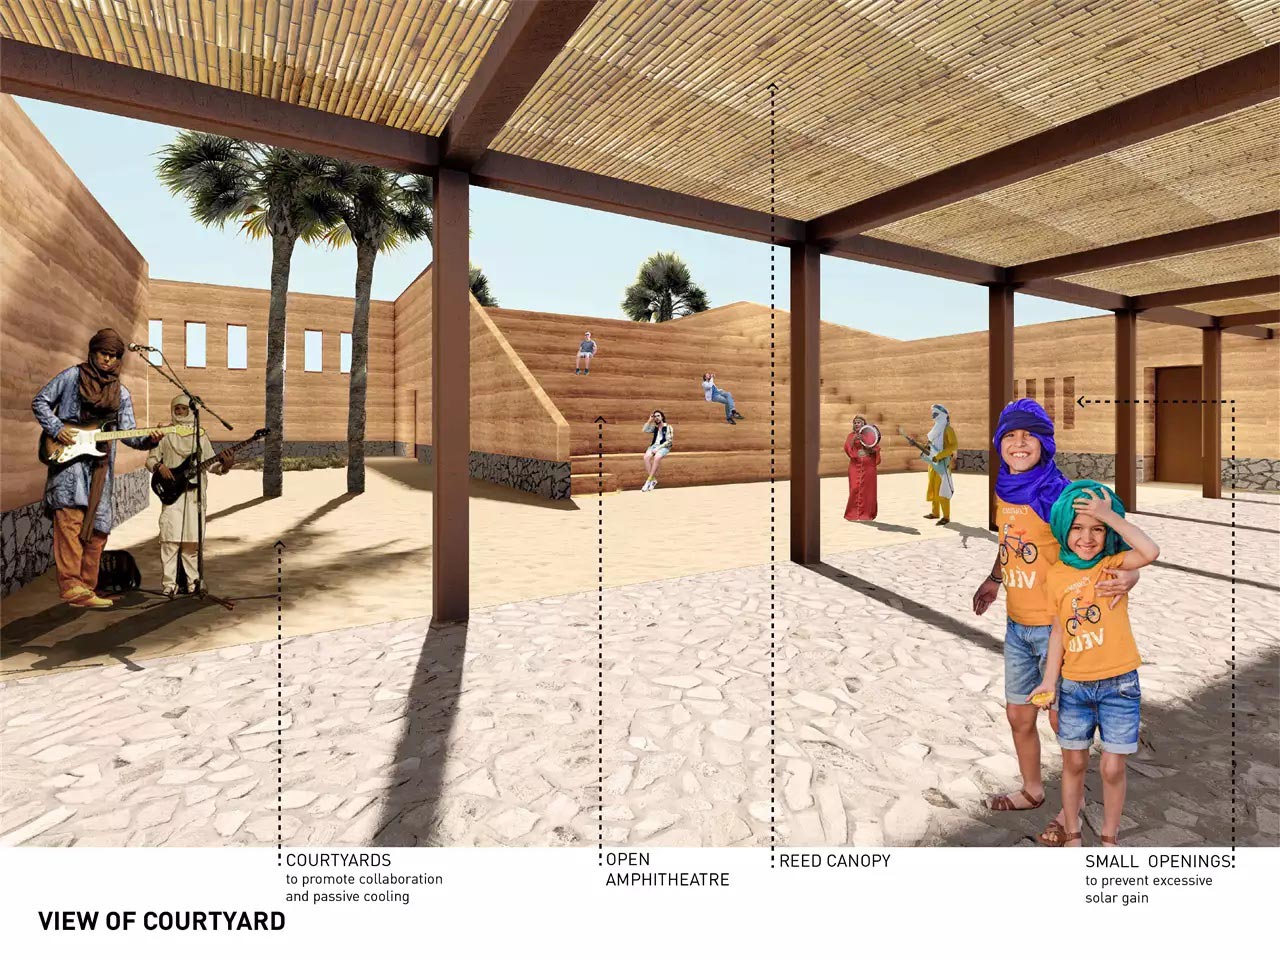 Joudour Sahara Wins Holcim Global Prize for Sustainable Architecture